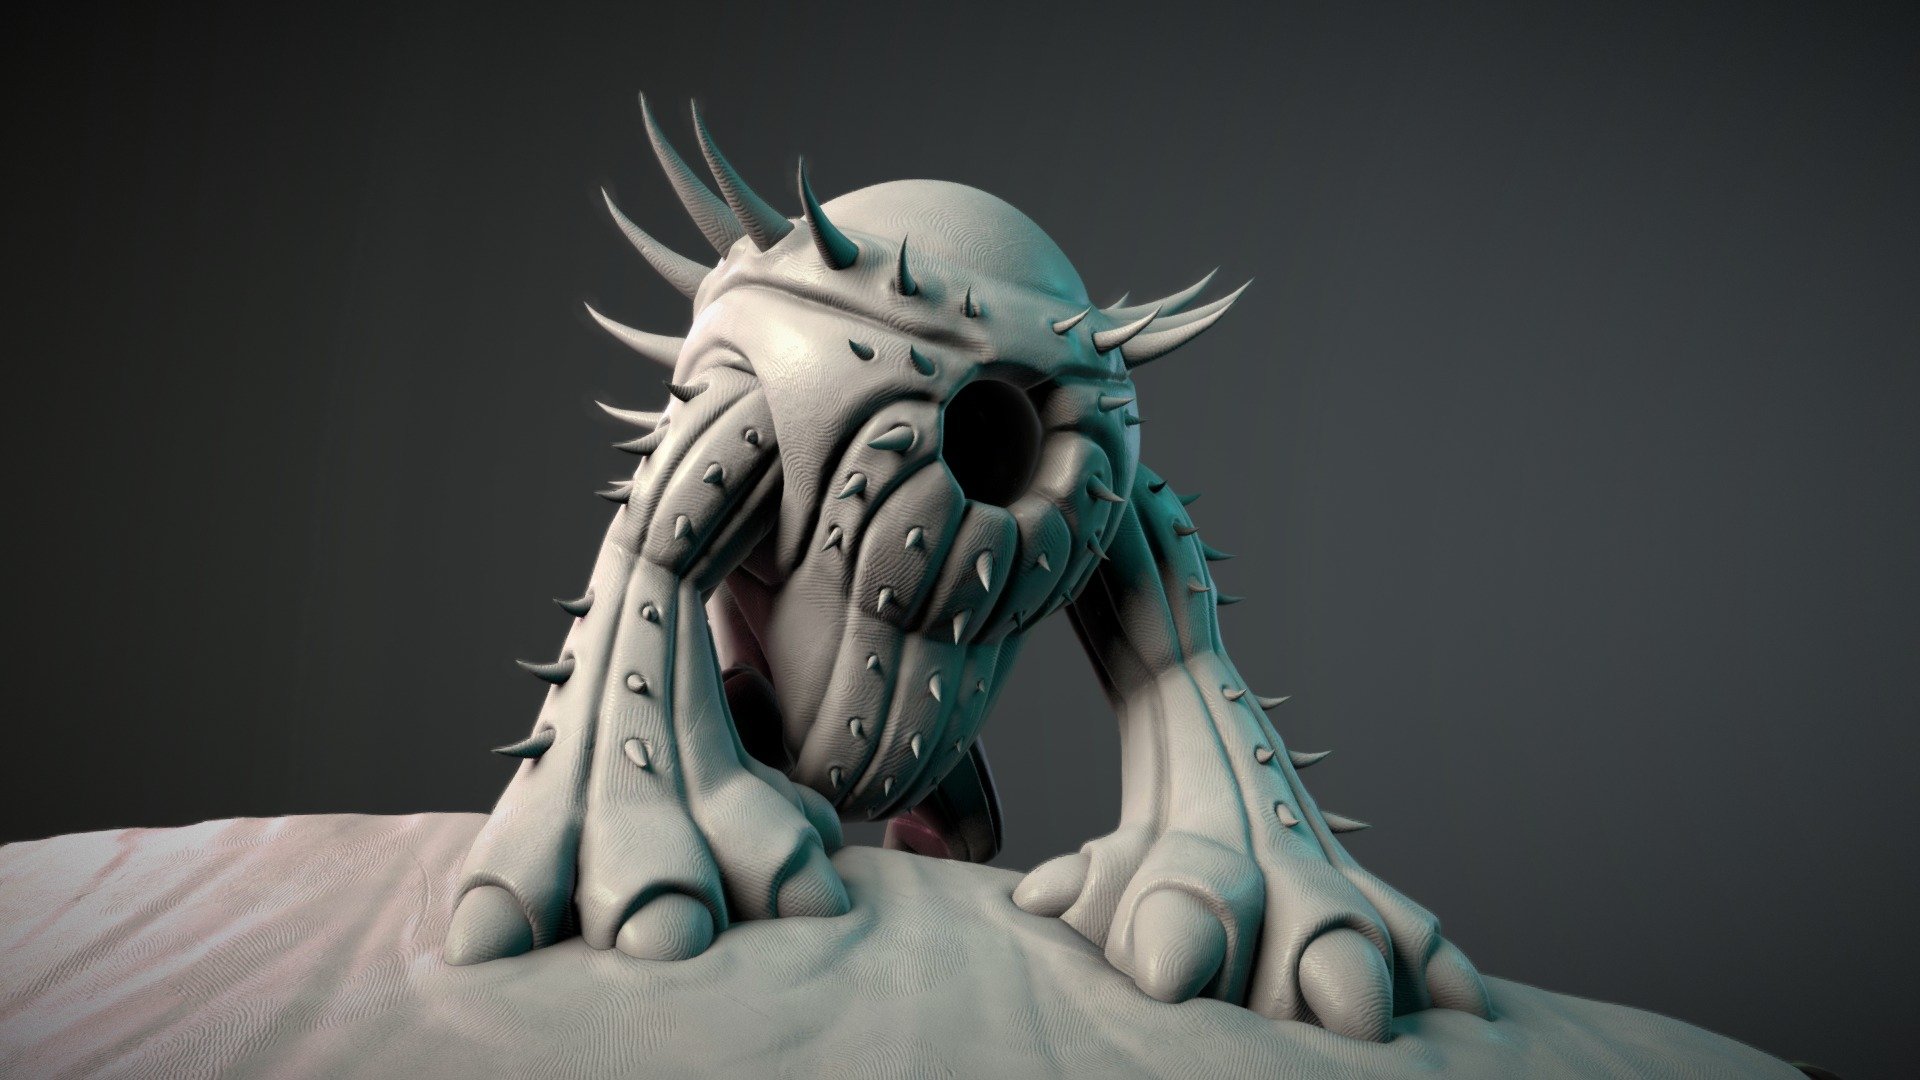 Day 5 for SculptJanuary with the topic &ldquo;Creature - Golem